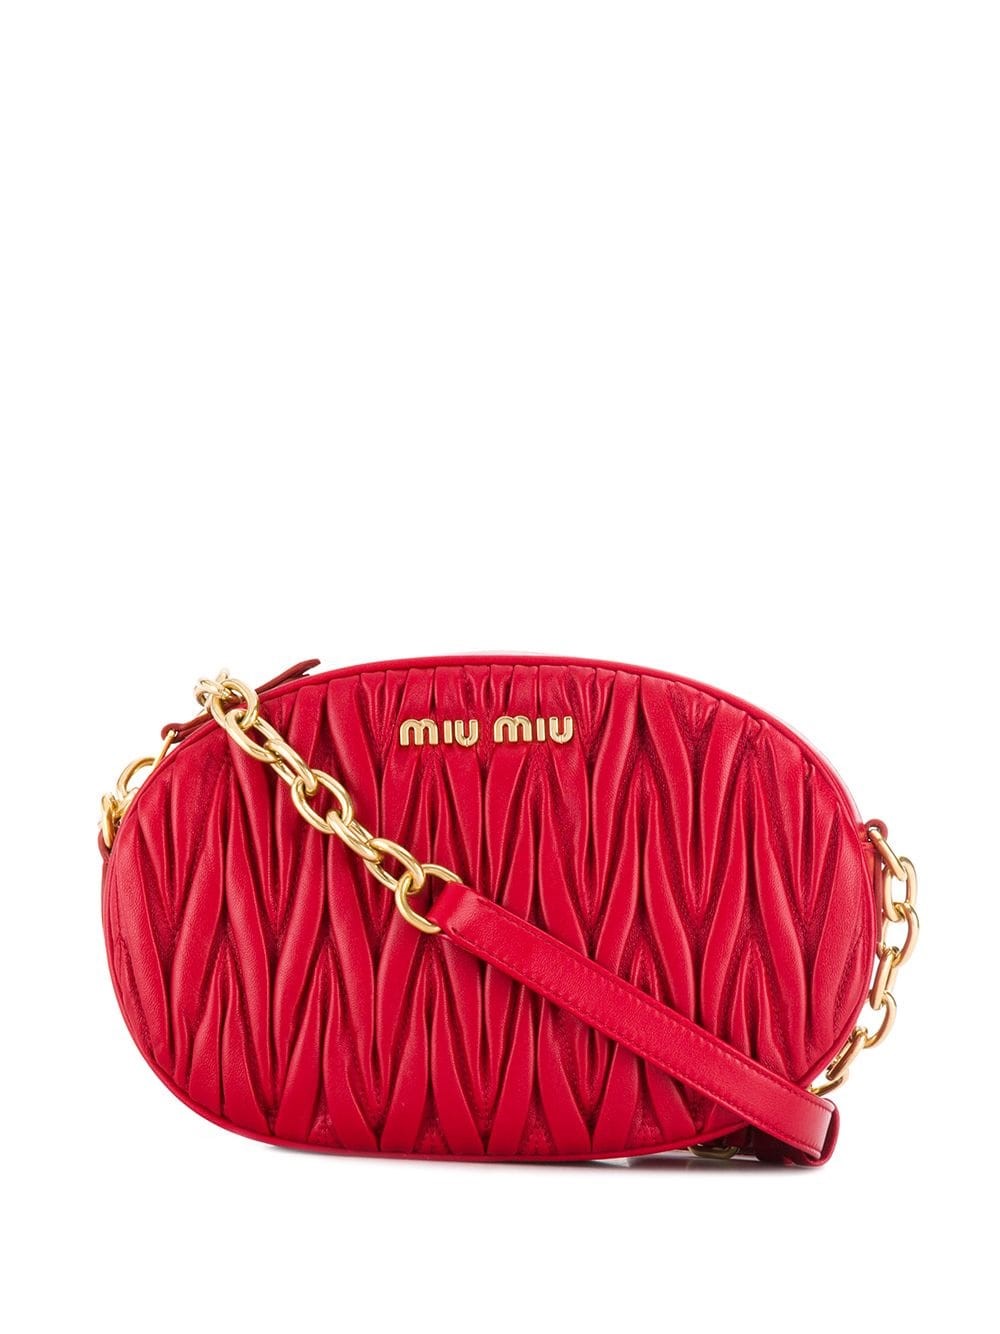 miu miu QUILTED LEATHER CROSS BODY BAG available on montiboutique.com ...